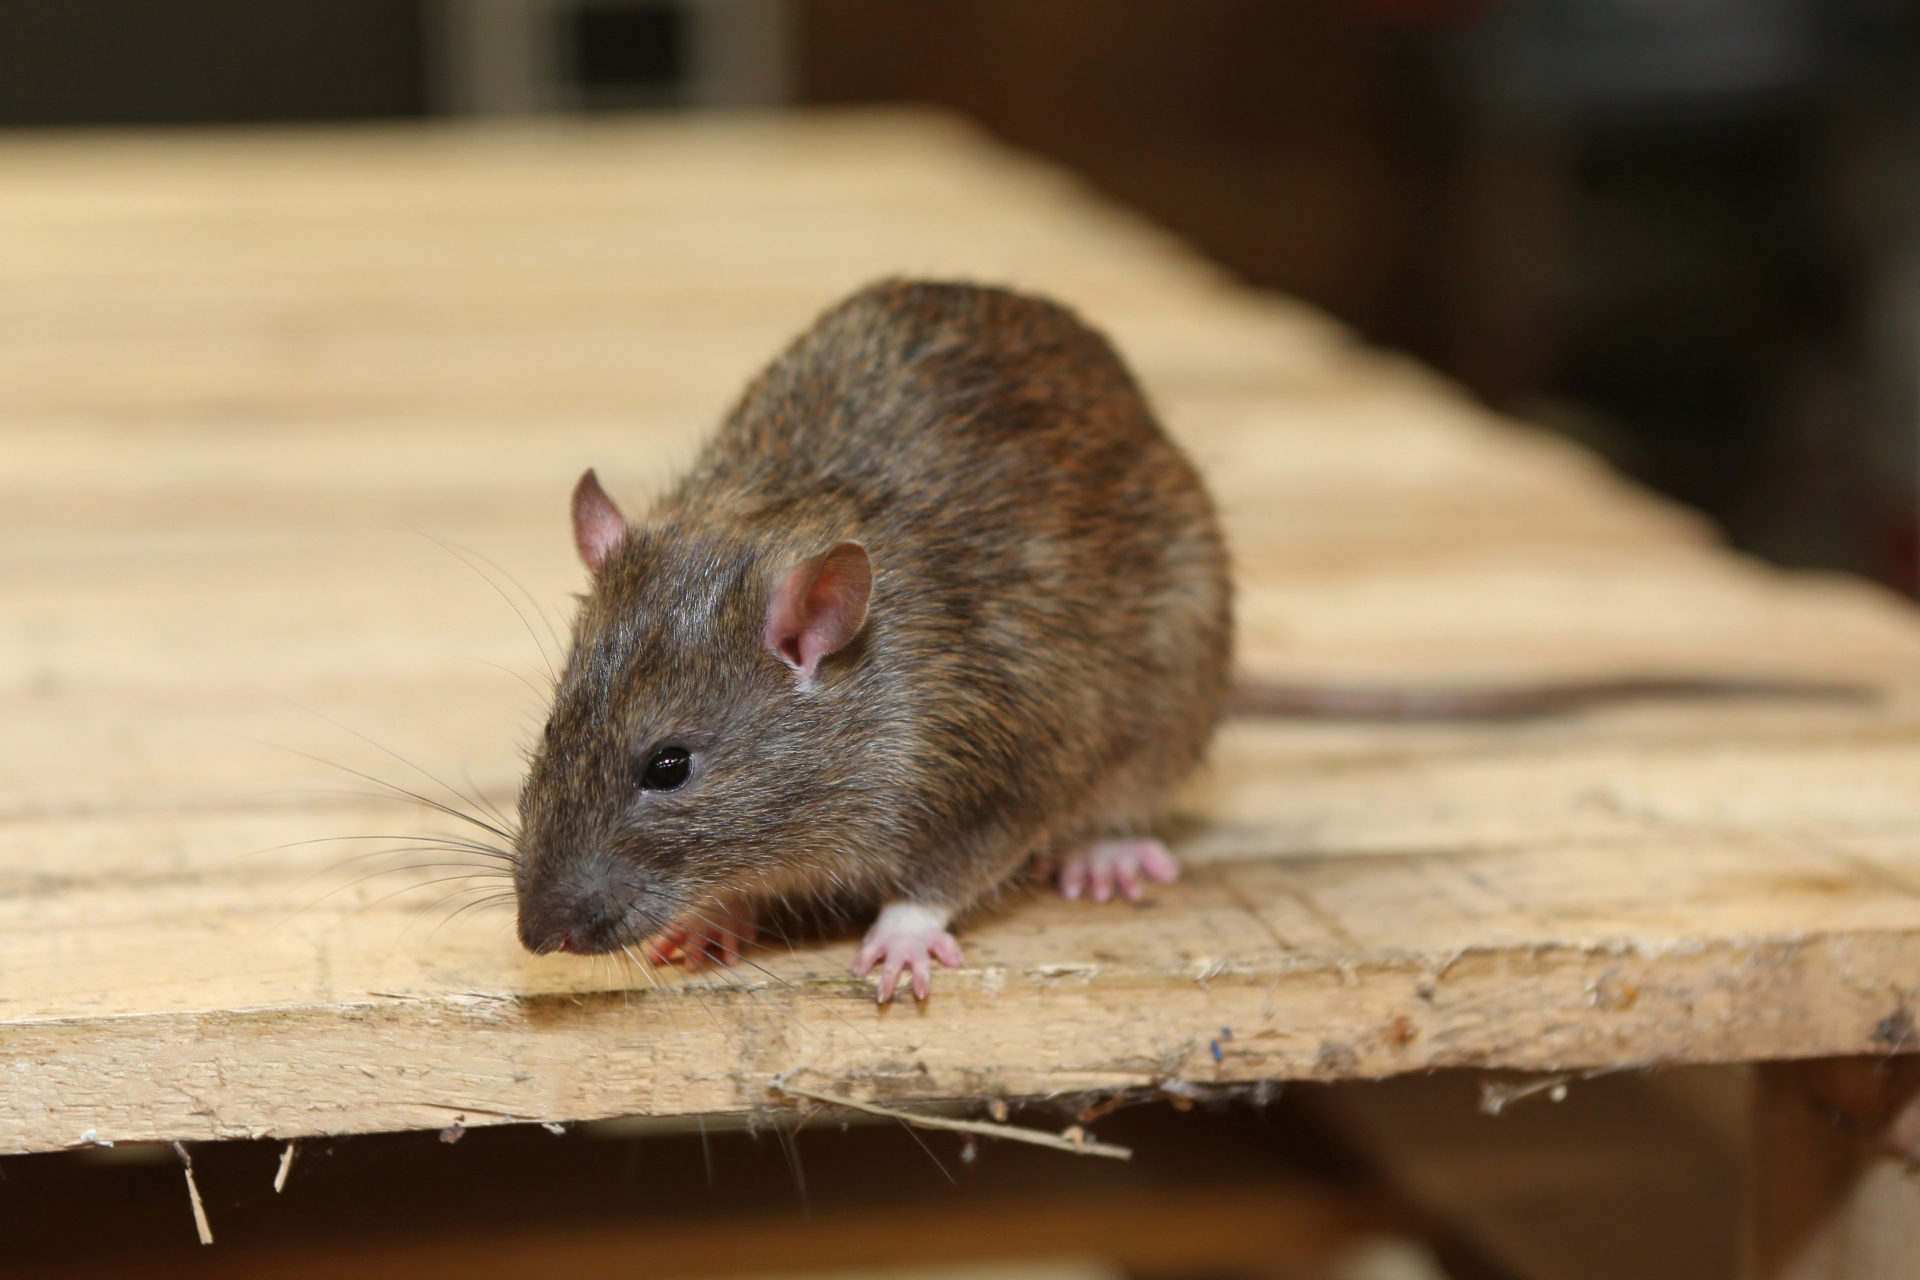 Rat extermination, Pest Control in Ewell, Stoneleigh, KT17. Call Now 020 8166 9746